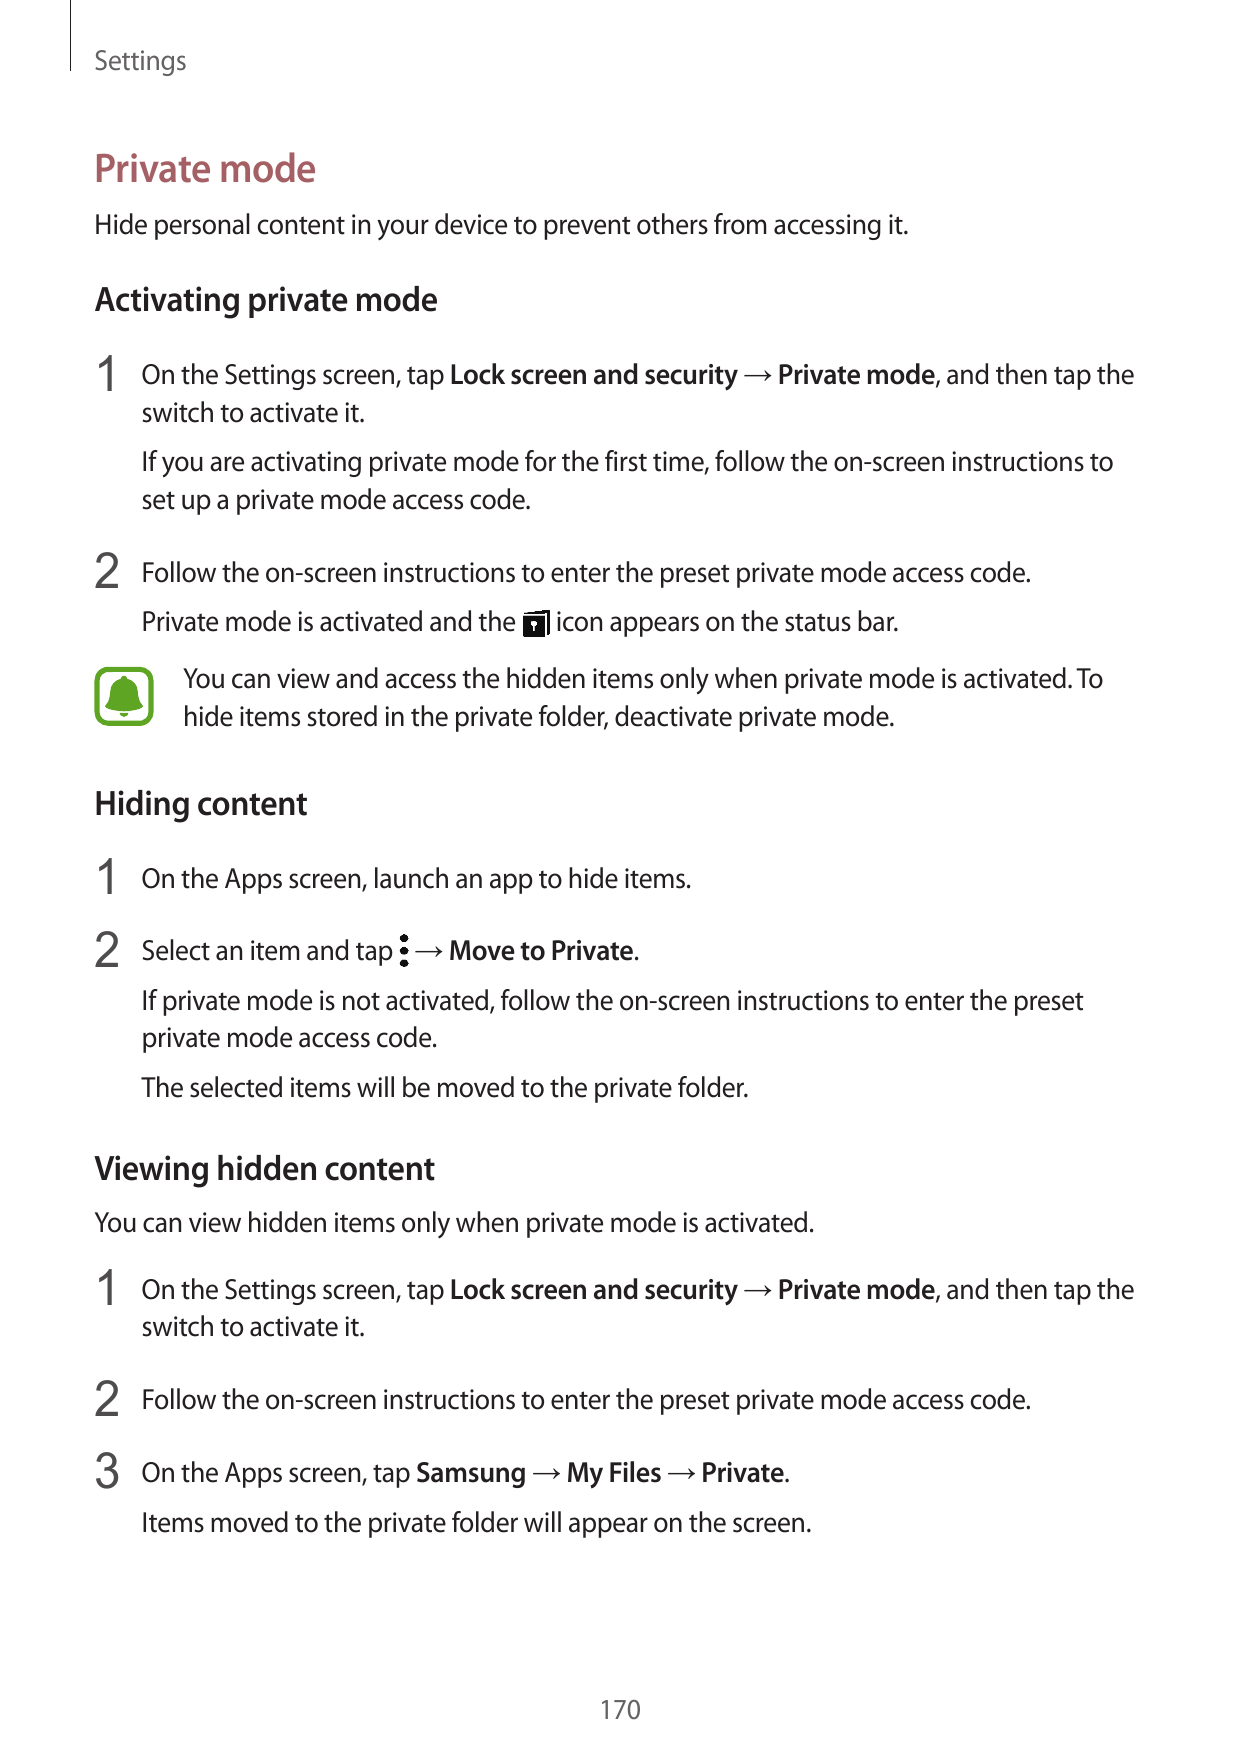 SettingsPrivate modeHide personal content in your device to prevent others from accessing it.Activating private mode1 On the Set